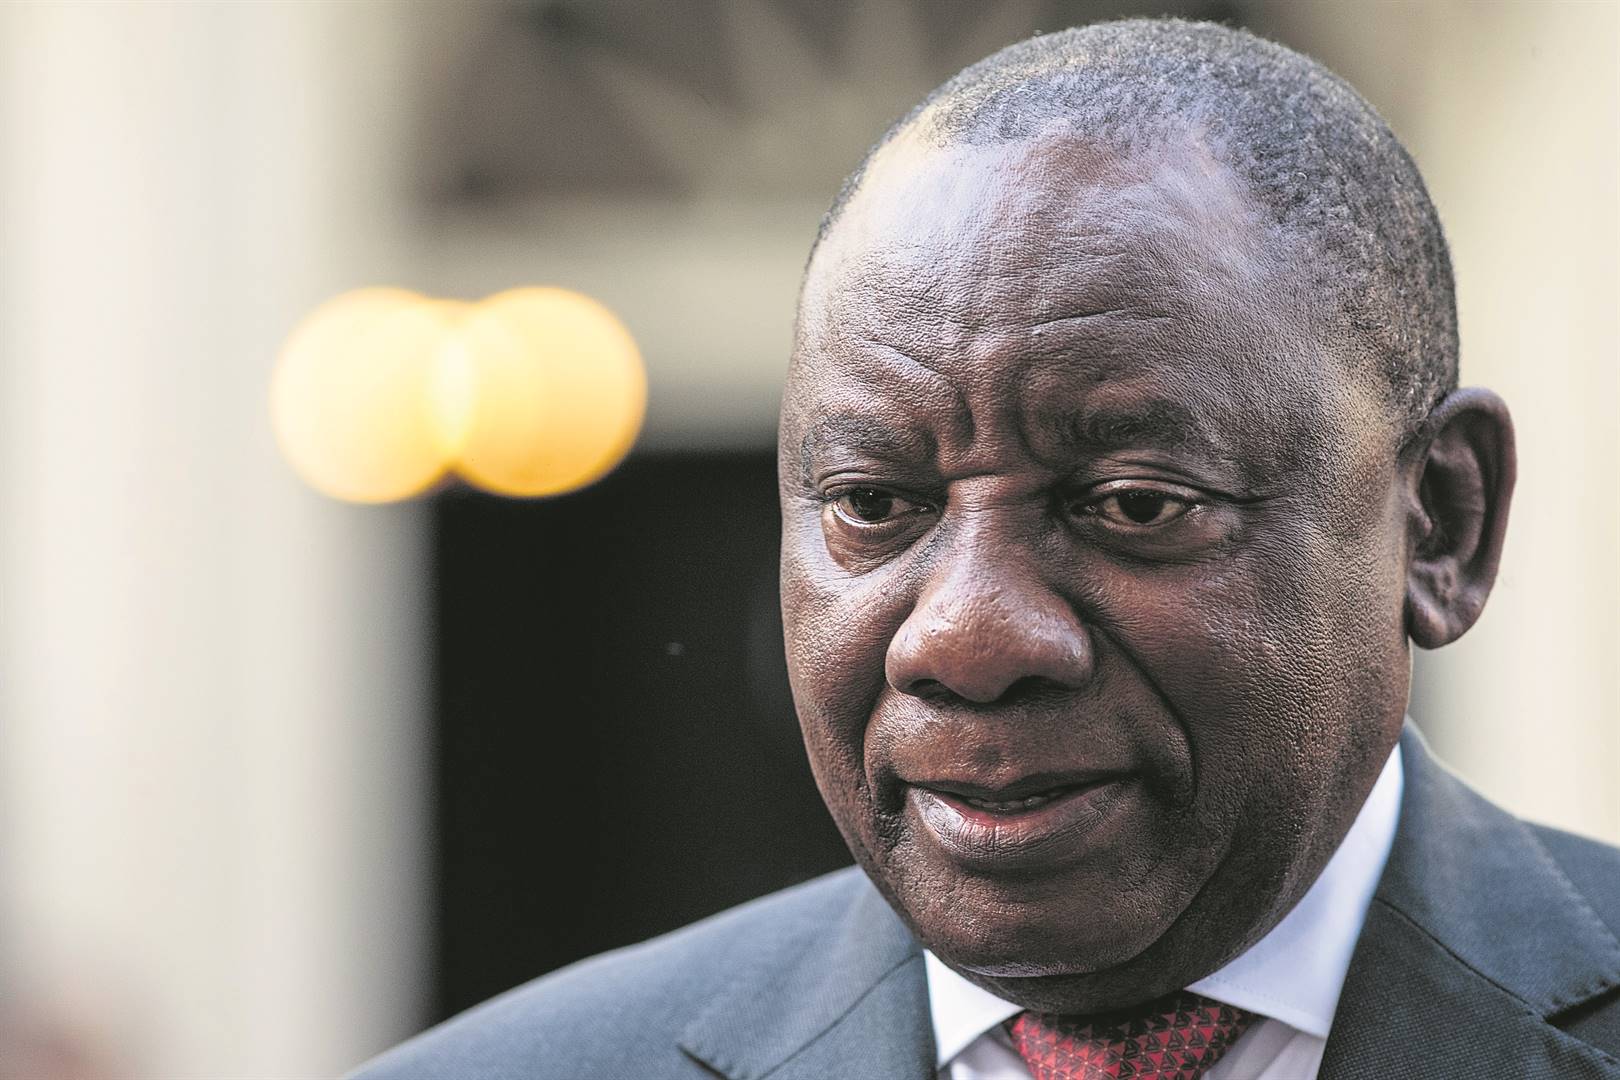 President Cyril Ramaphosa Photo : getty images